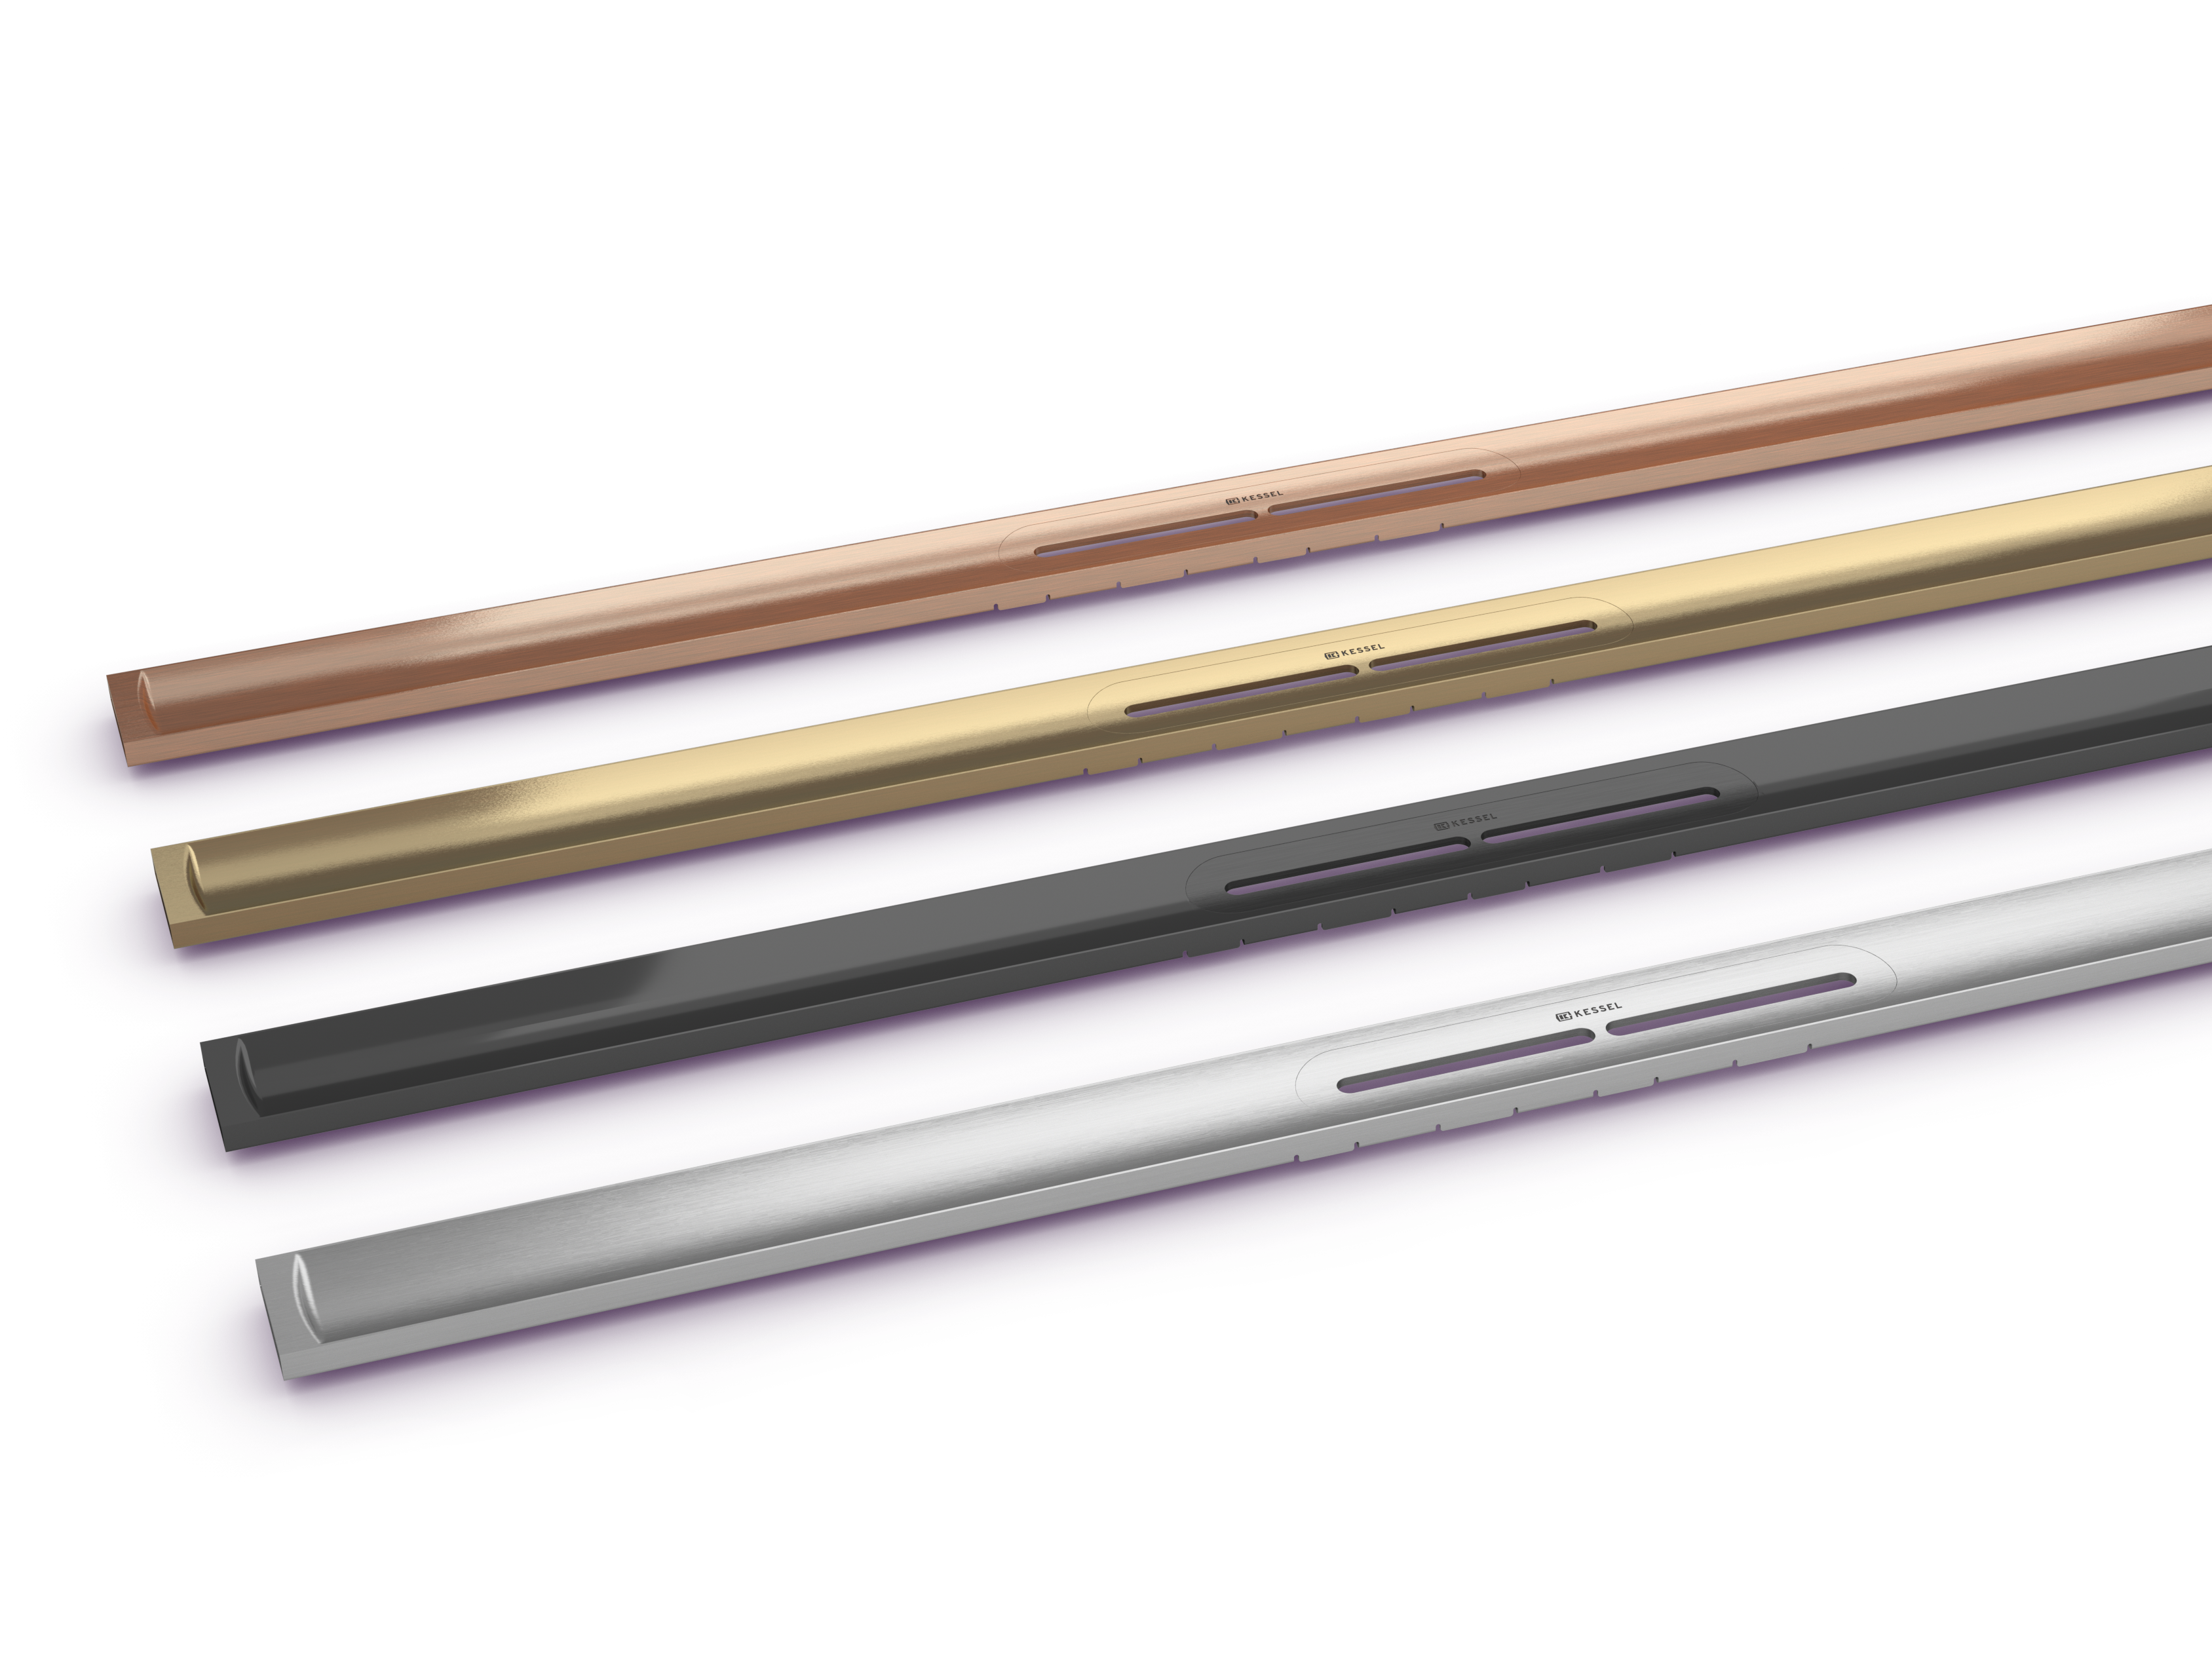 Stainless steel in elegant colours: brushed copper, brushed bronze, brushed black, brushed stainless steel